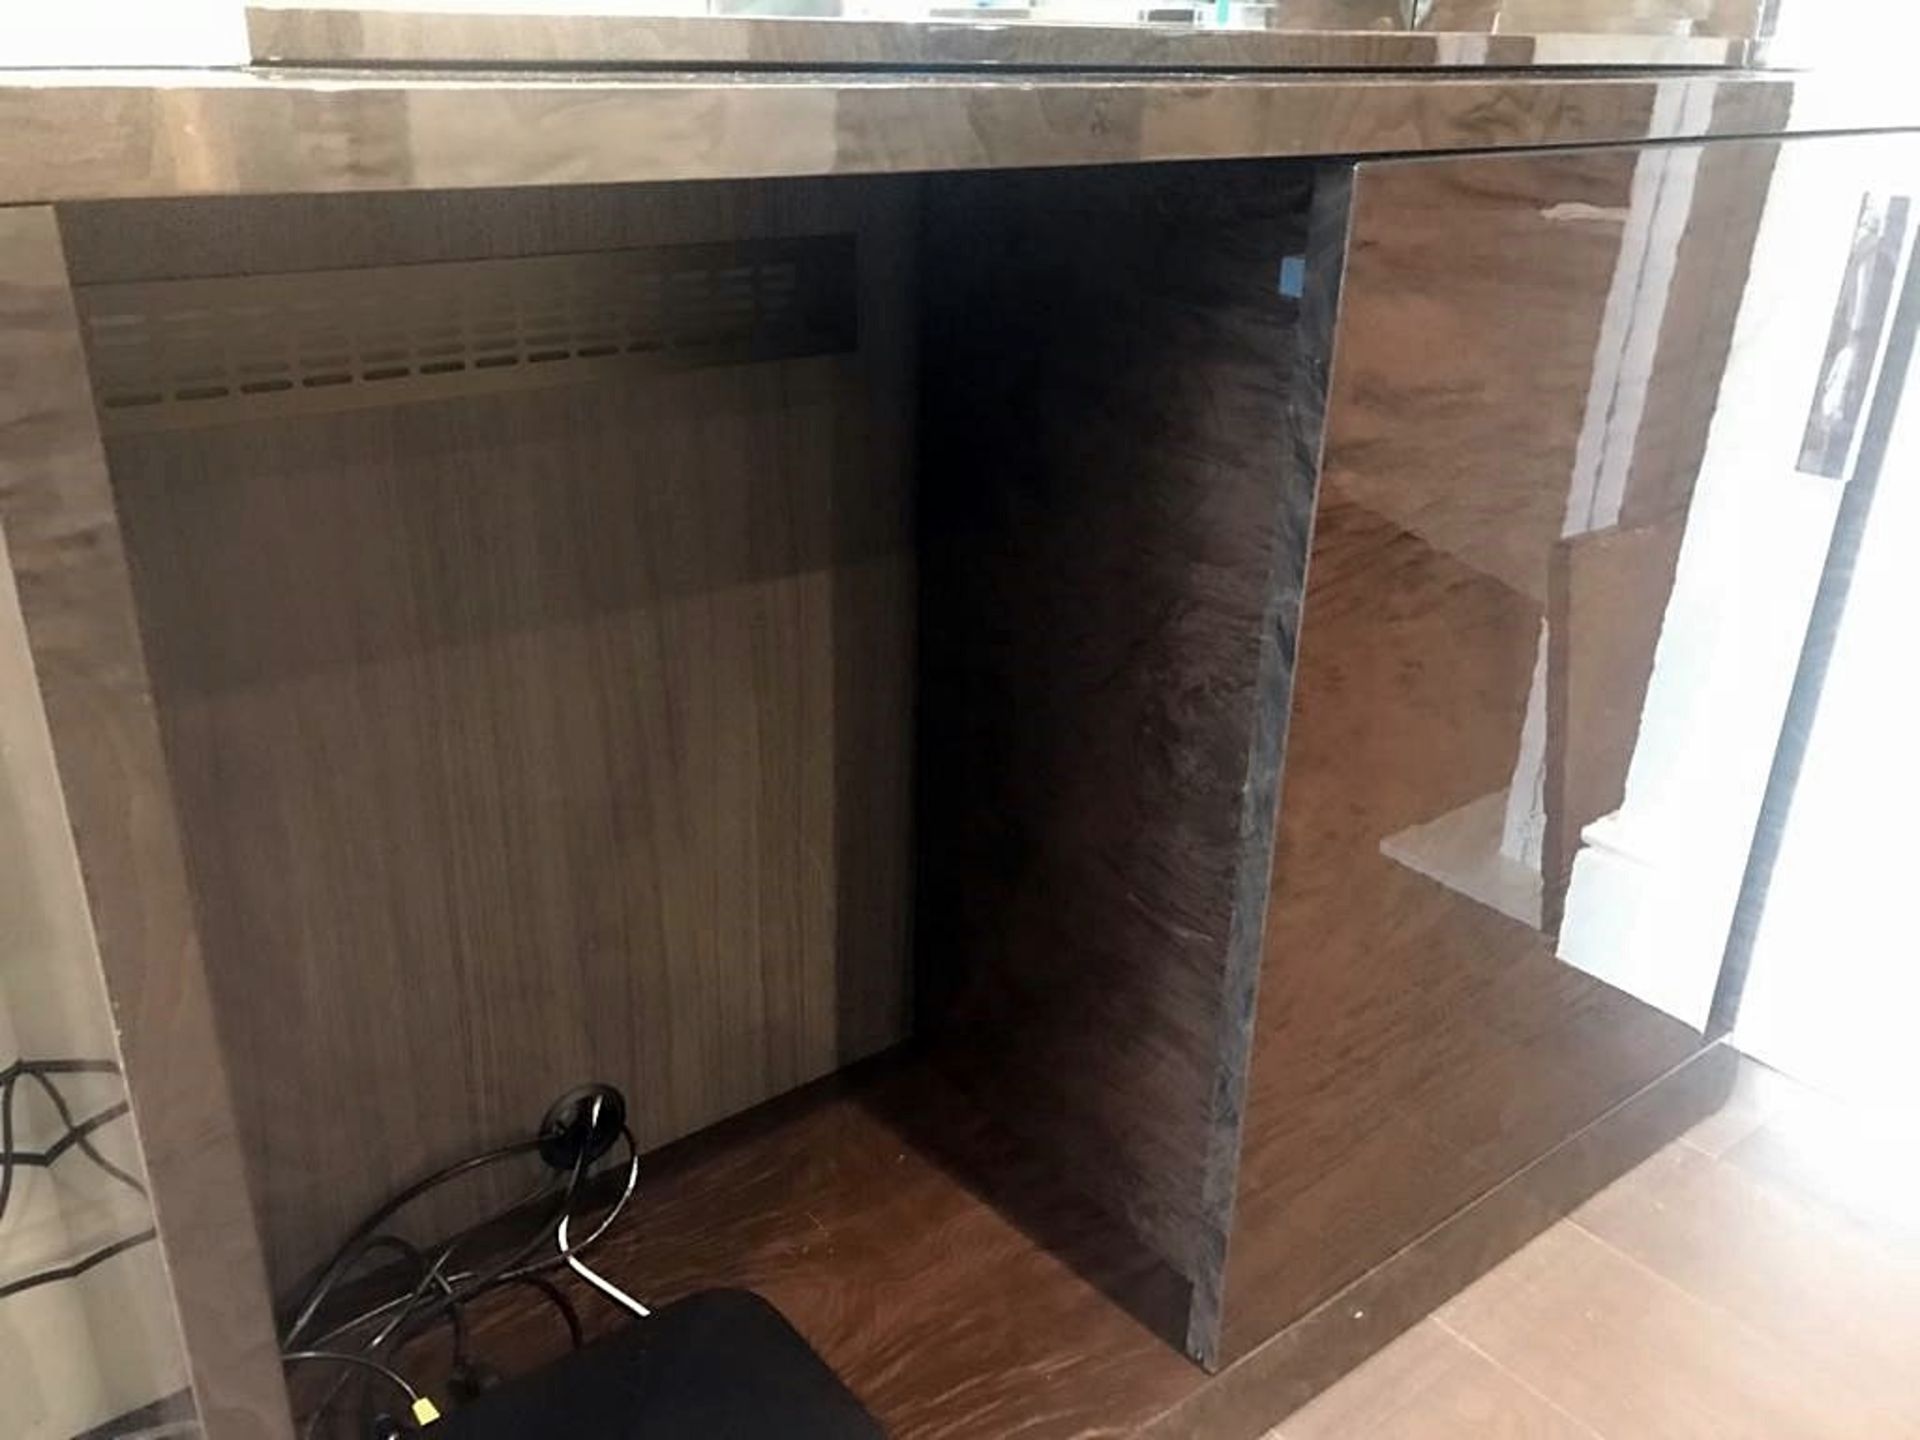 1 x GIORGIO "Absolute" Credenza/Sideboard With A Stunning Venetian Glass Shelved Illuminated Top - Image 14 of 18